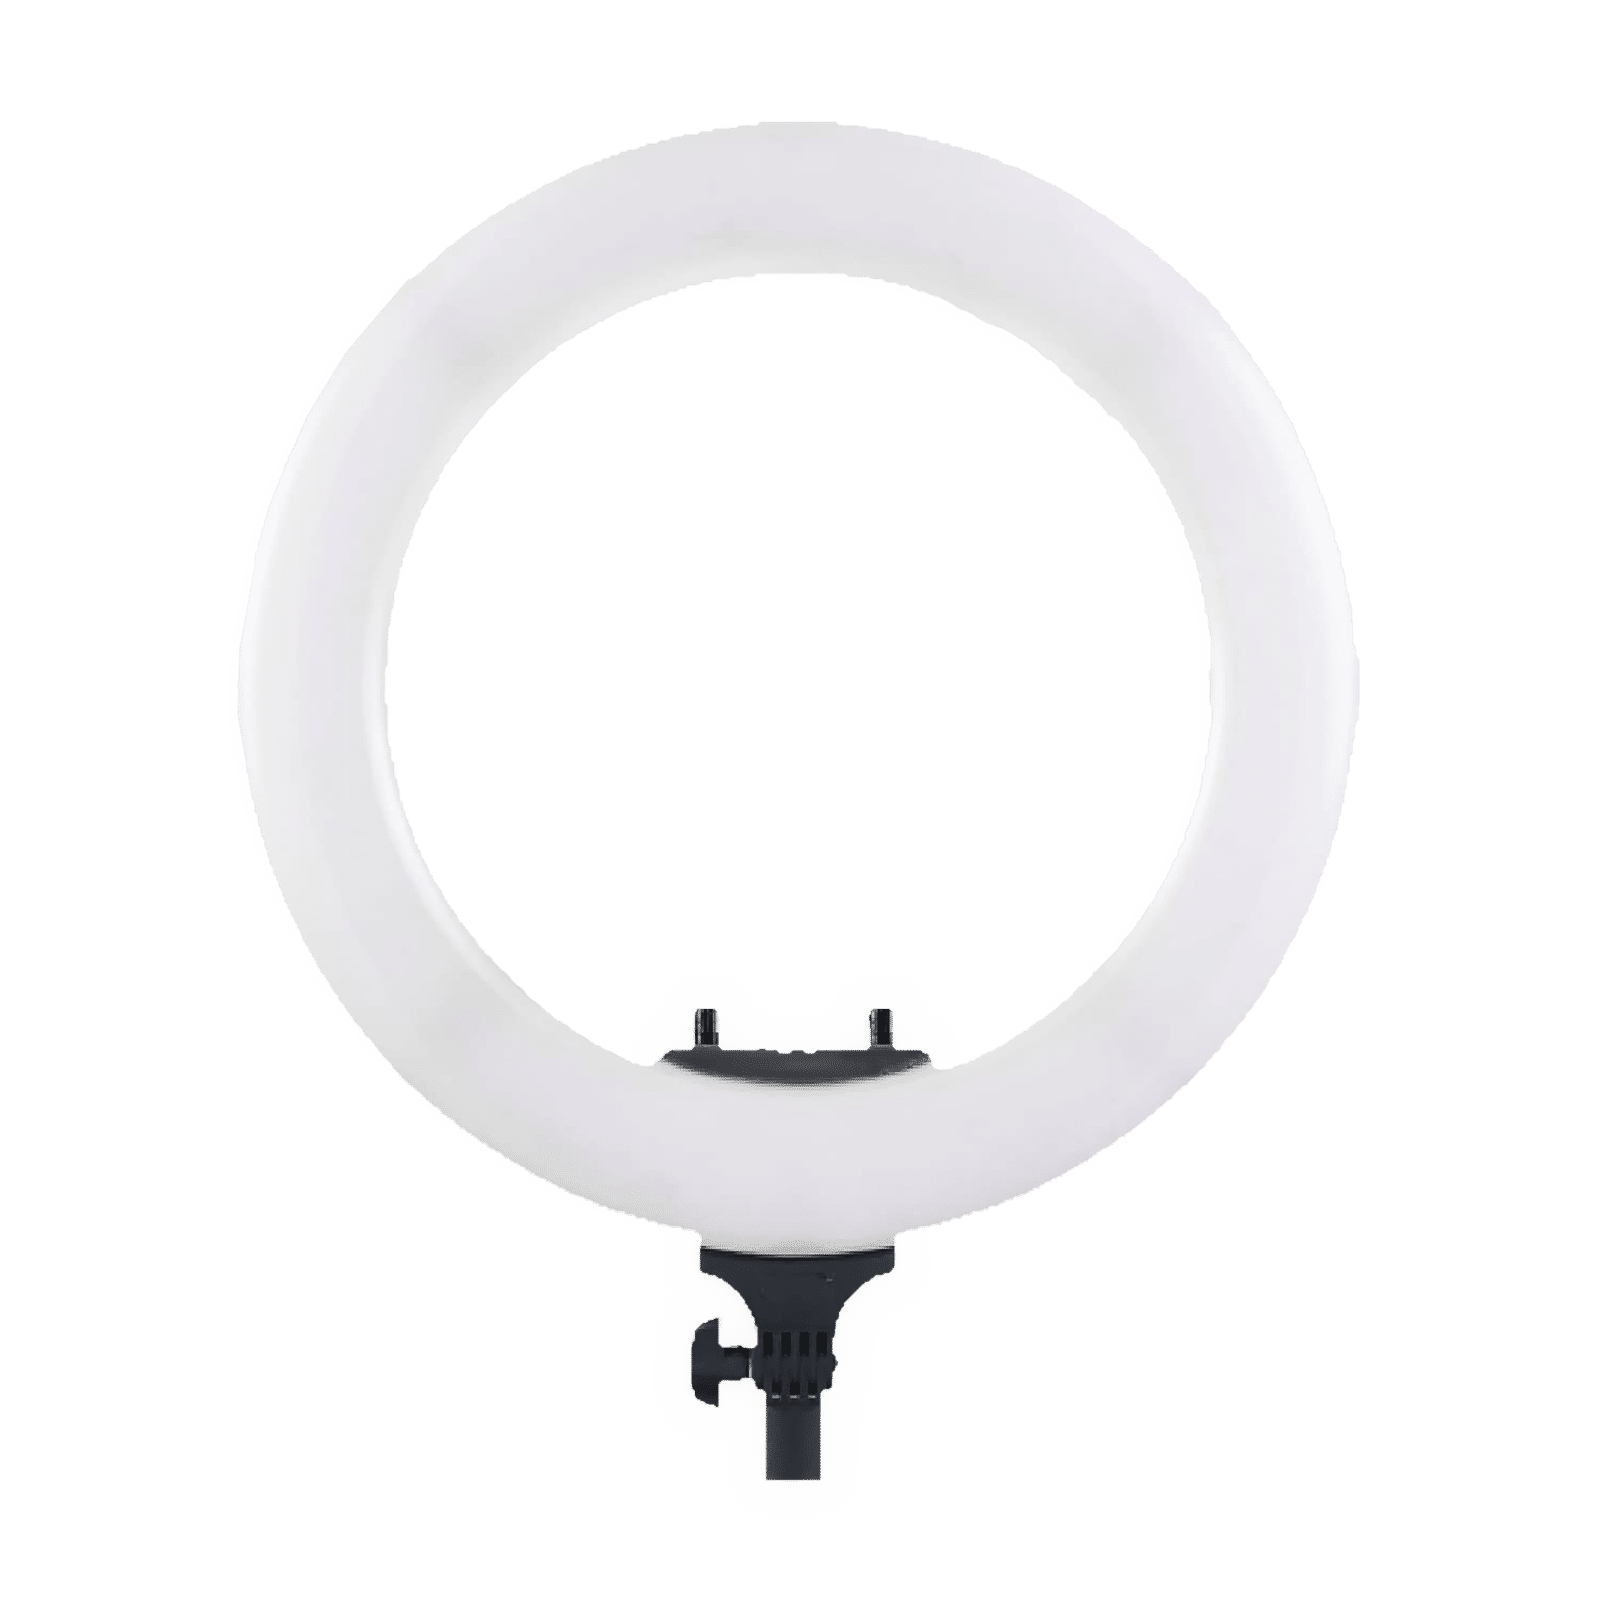 AT&T Selfie Ring Light | AT&T Brand Shop